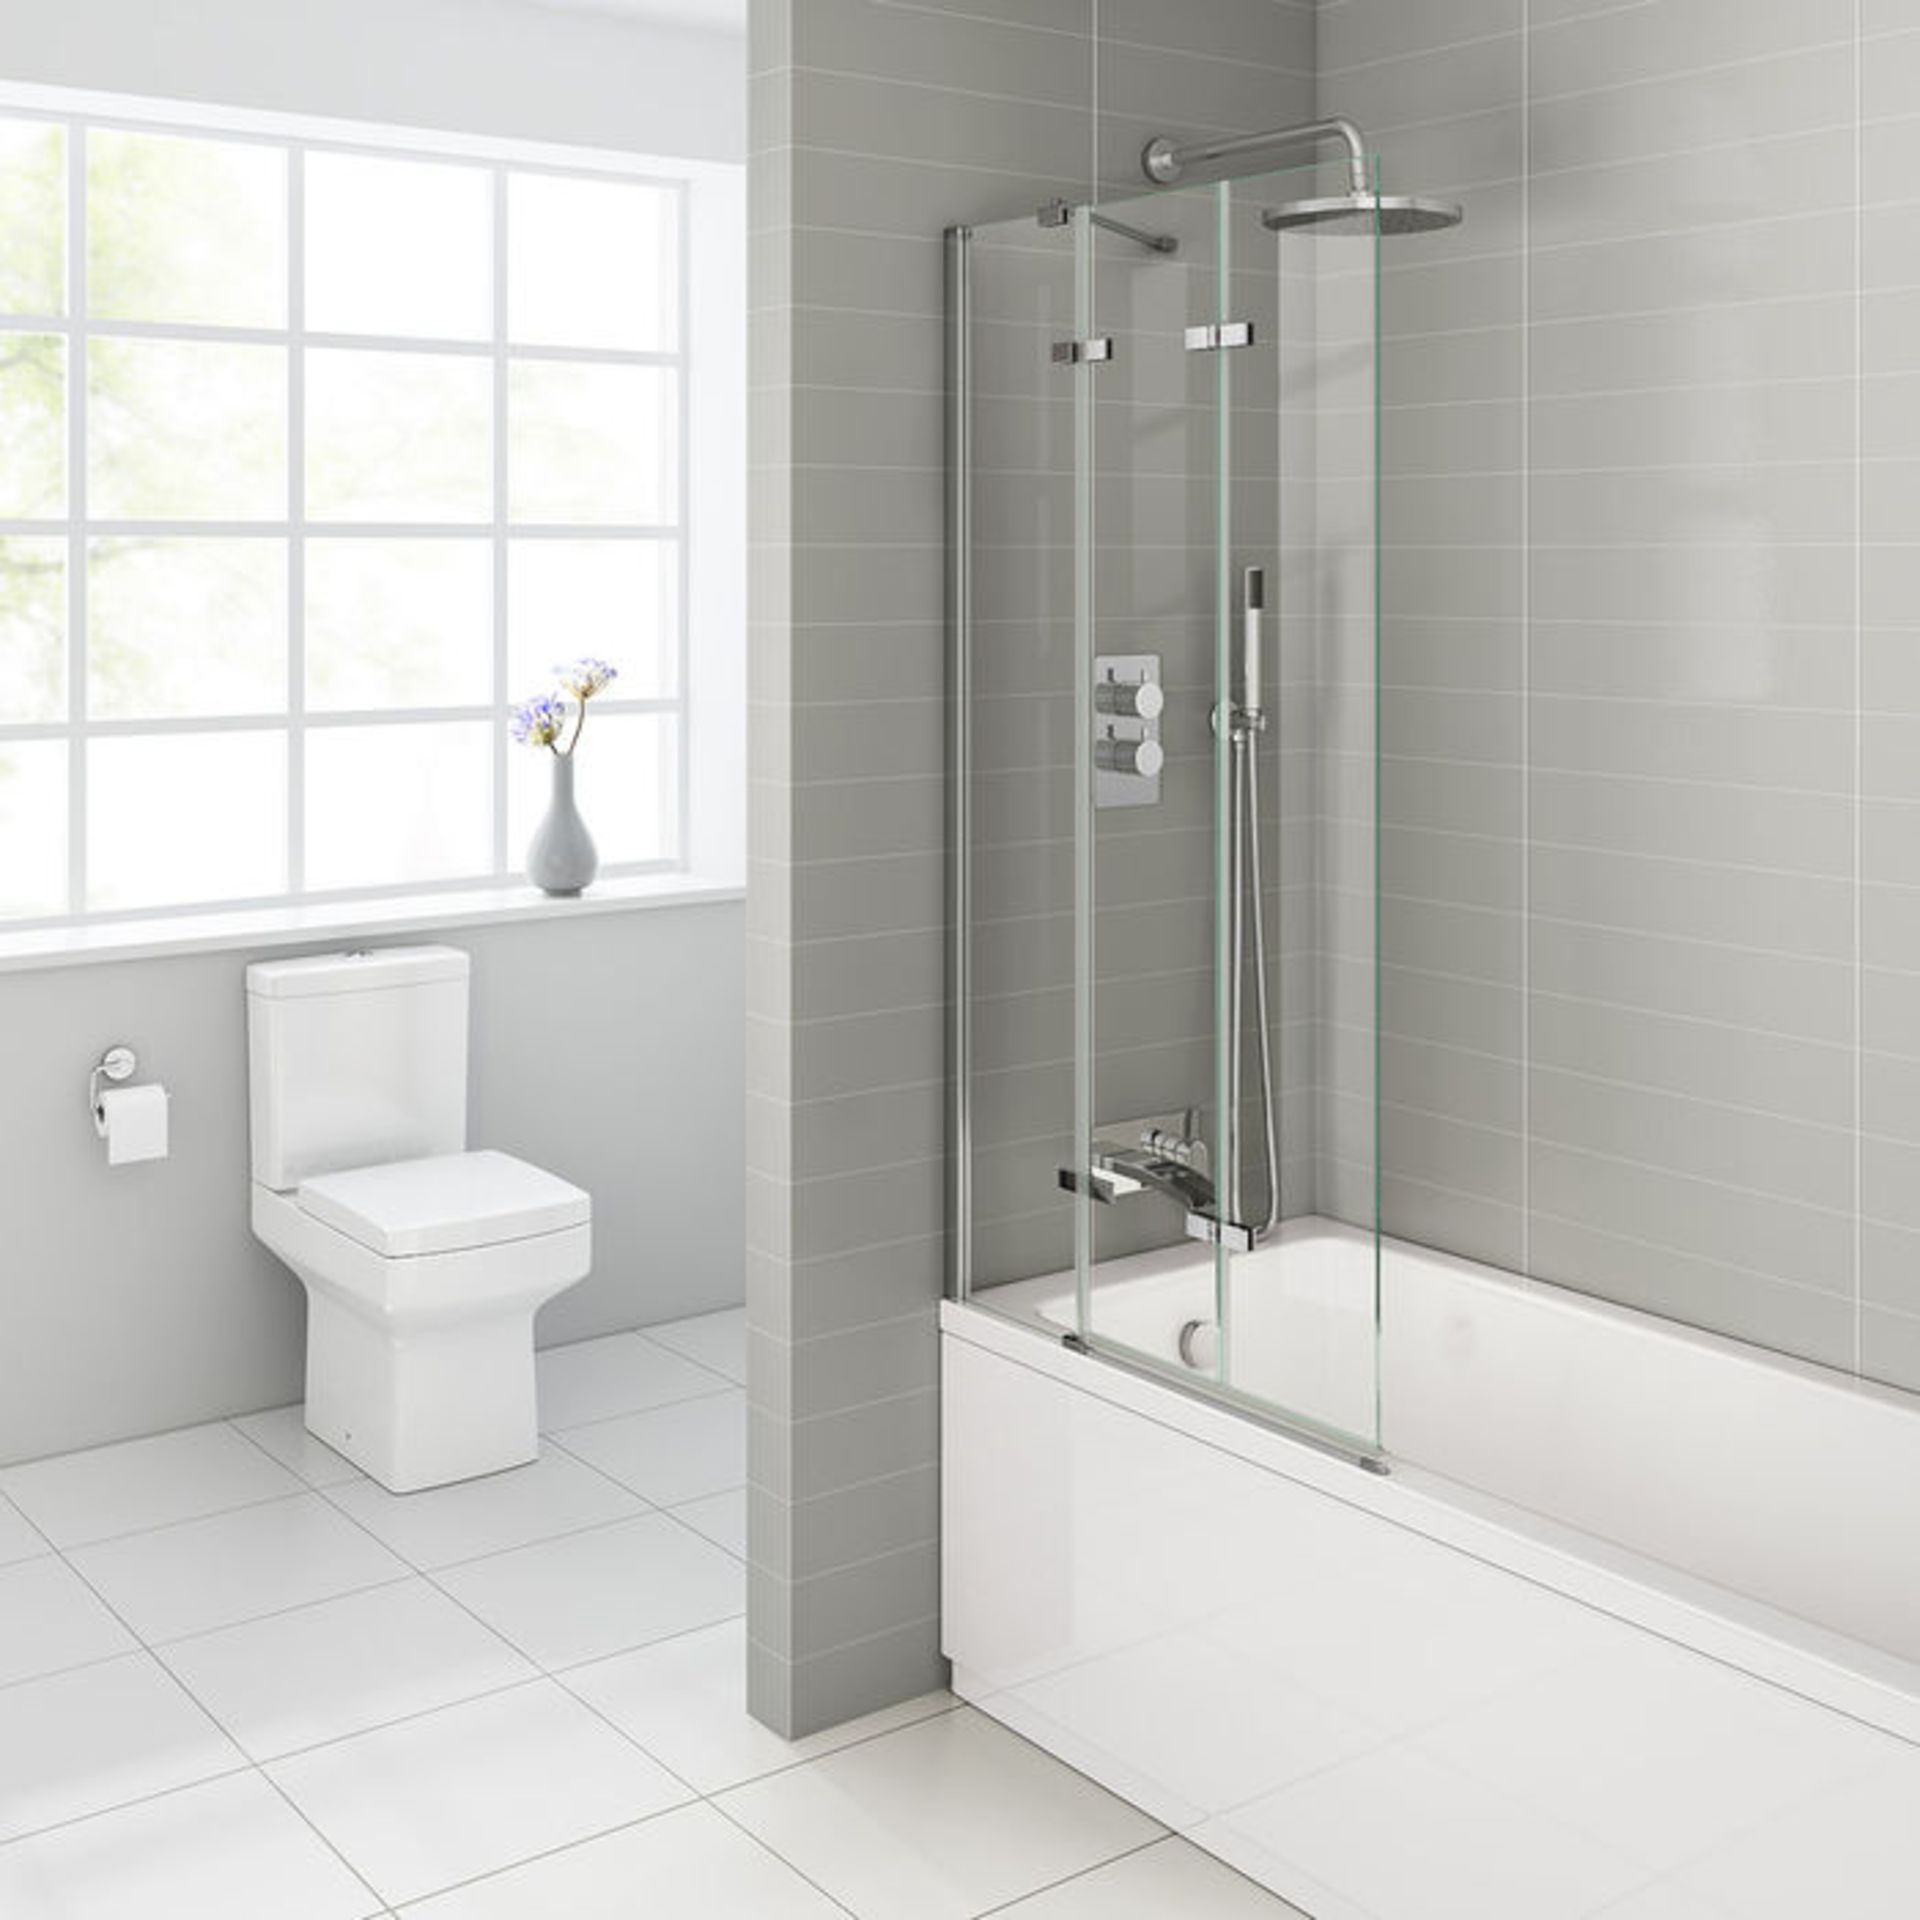 (MC69) 800mm Left Hand Folding Bath Screen - 6mm. RRP £249.99. EasyClean glass - Our glass has - Image 3 of 3